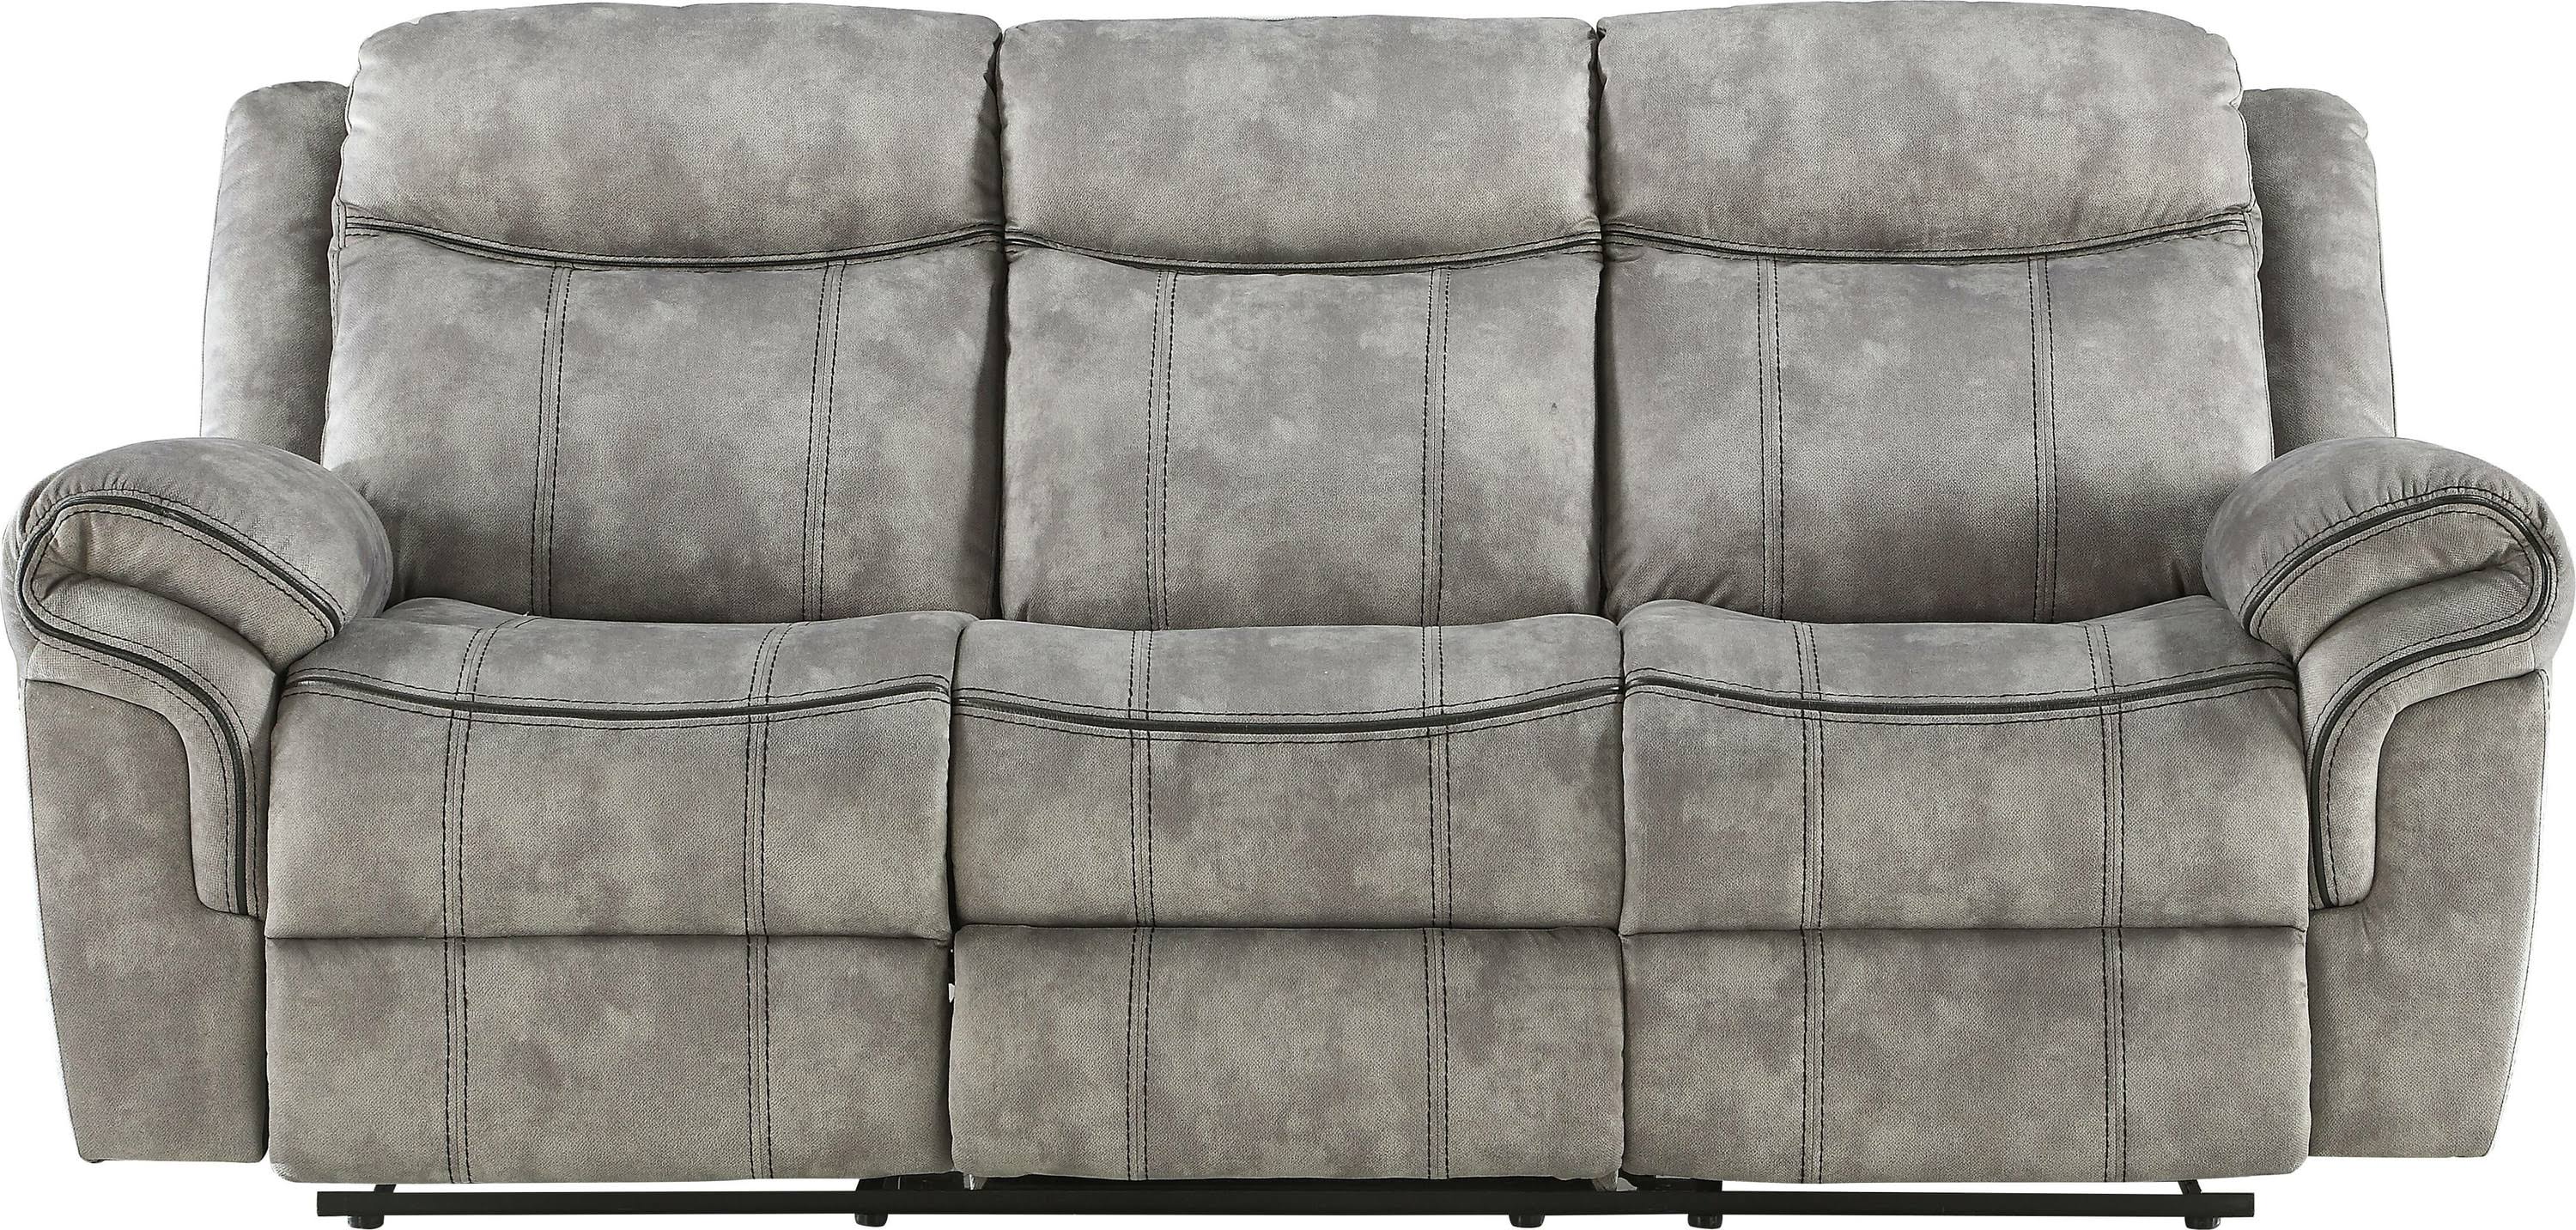 Two Tone Gray Reclining Sofa Front